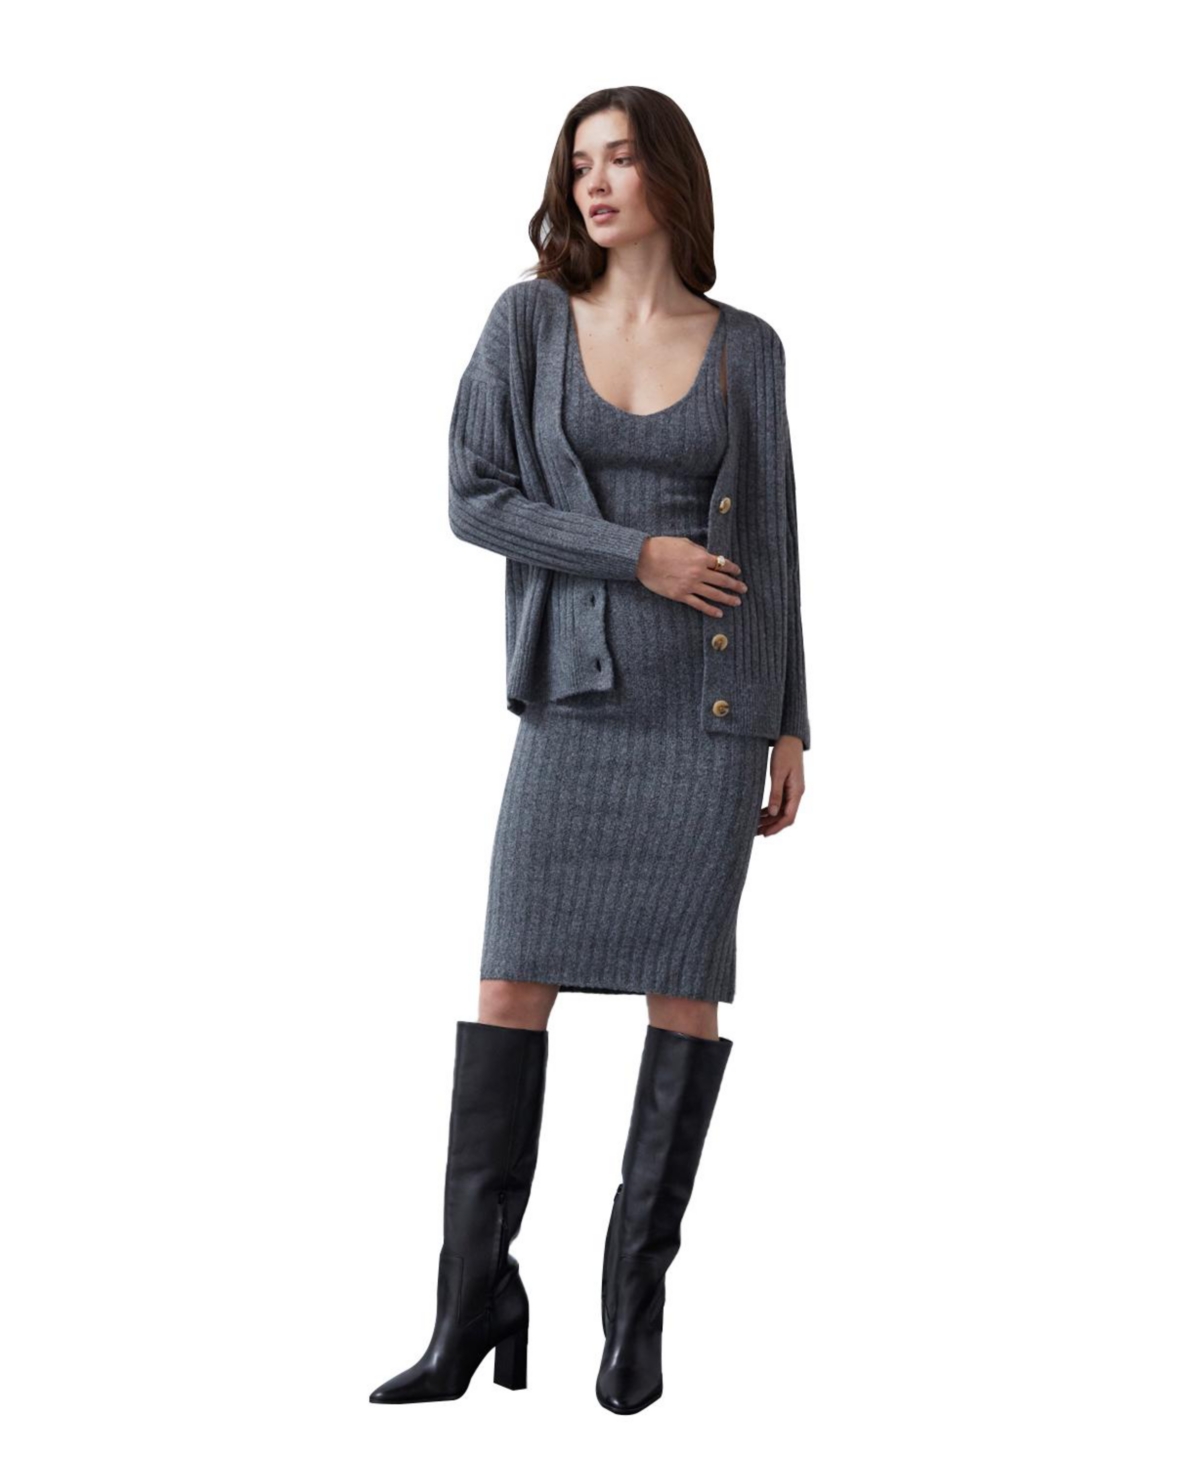 Women's Mave Brushed Ribbed Sweater Dress Two-Piece Set - Dark grey + charcoal